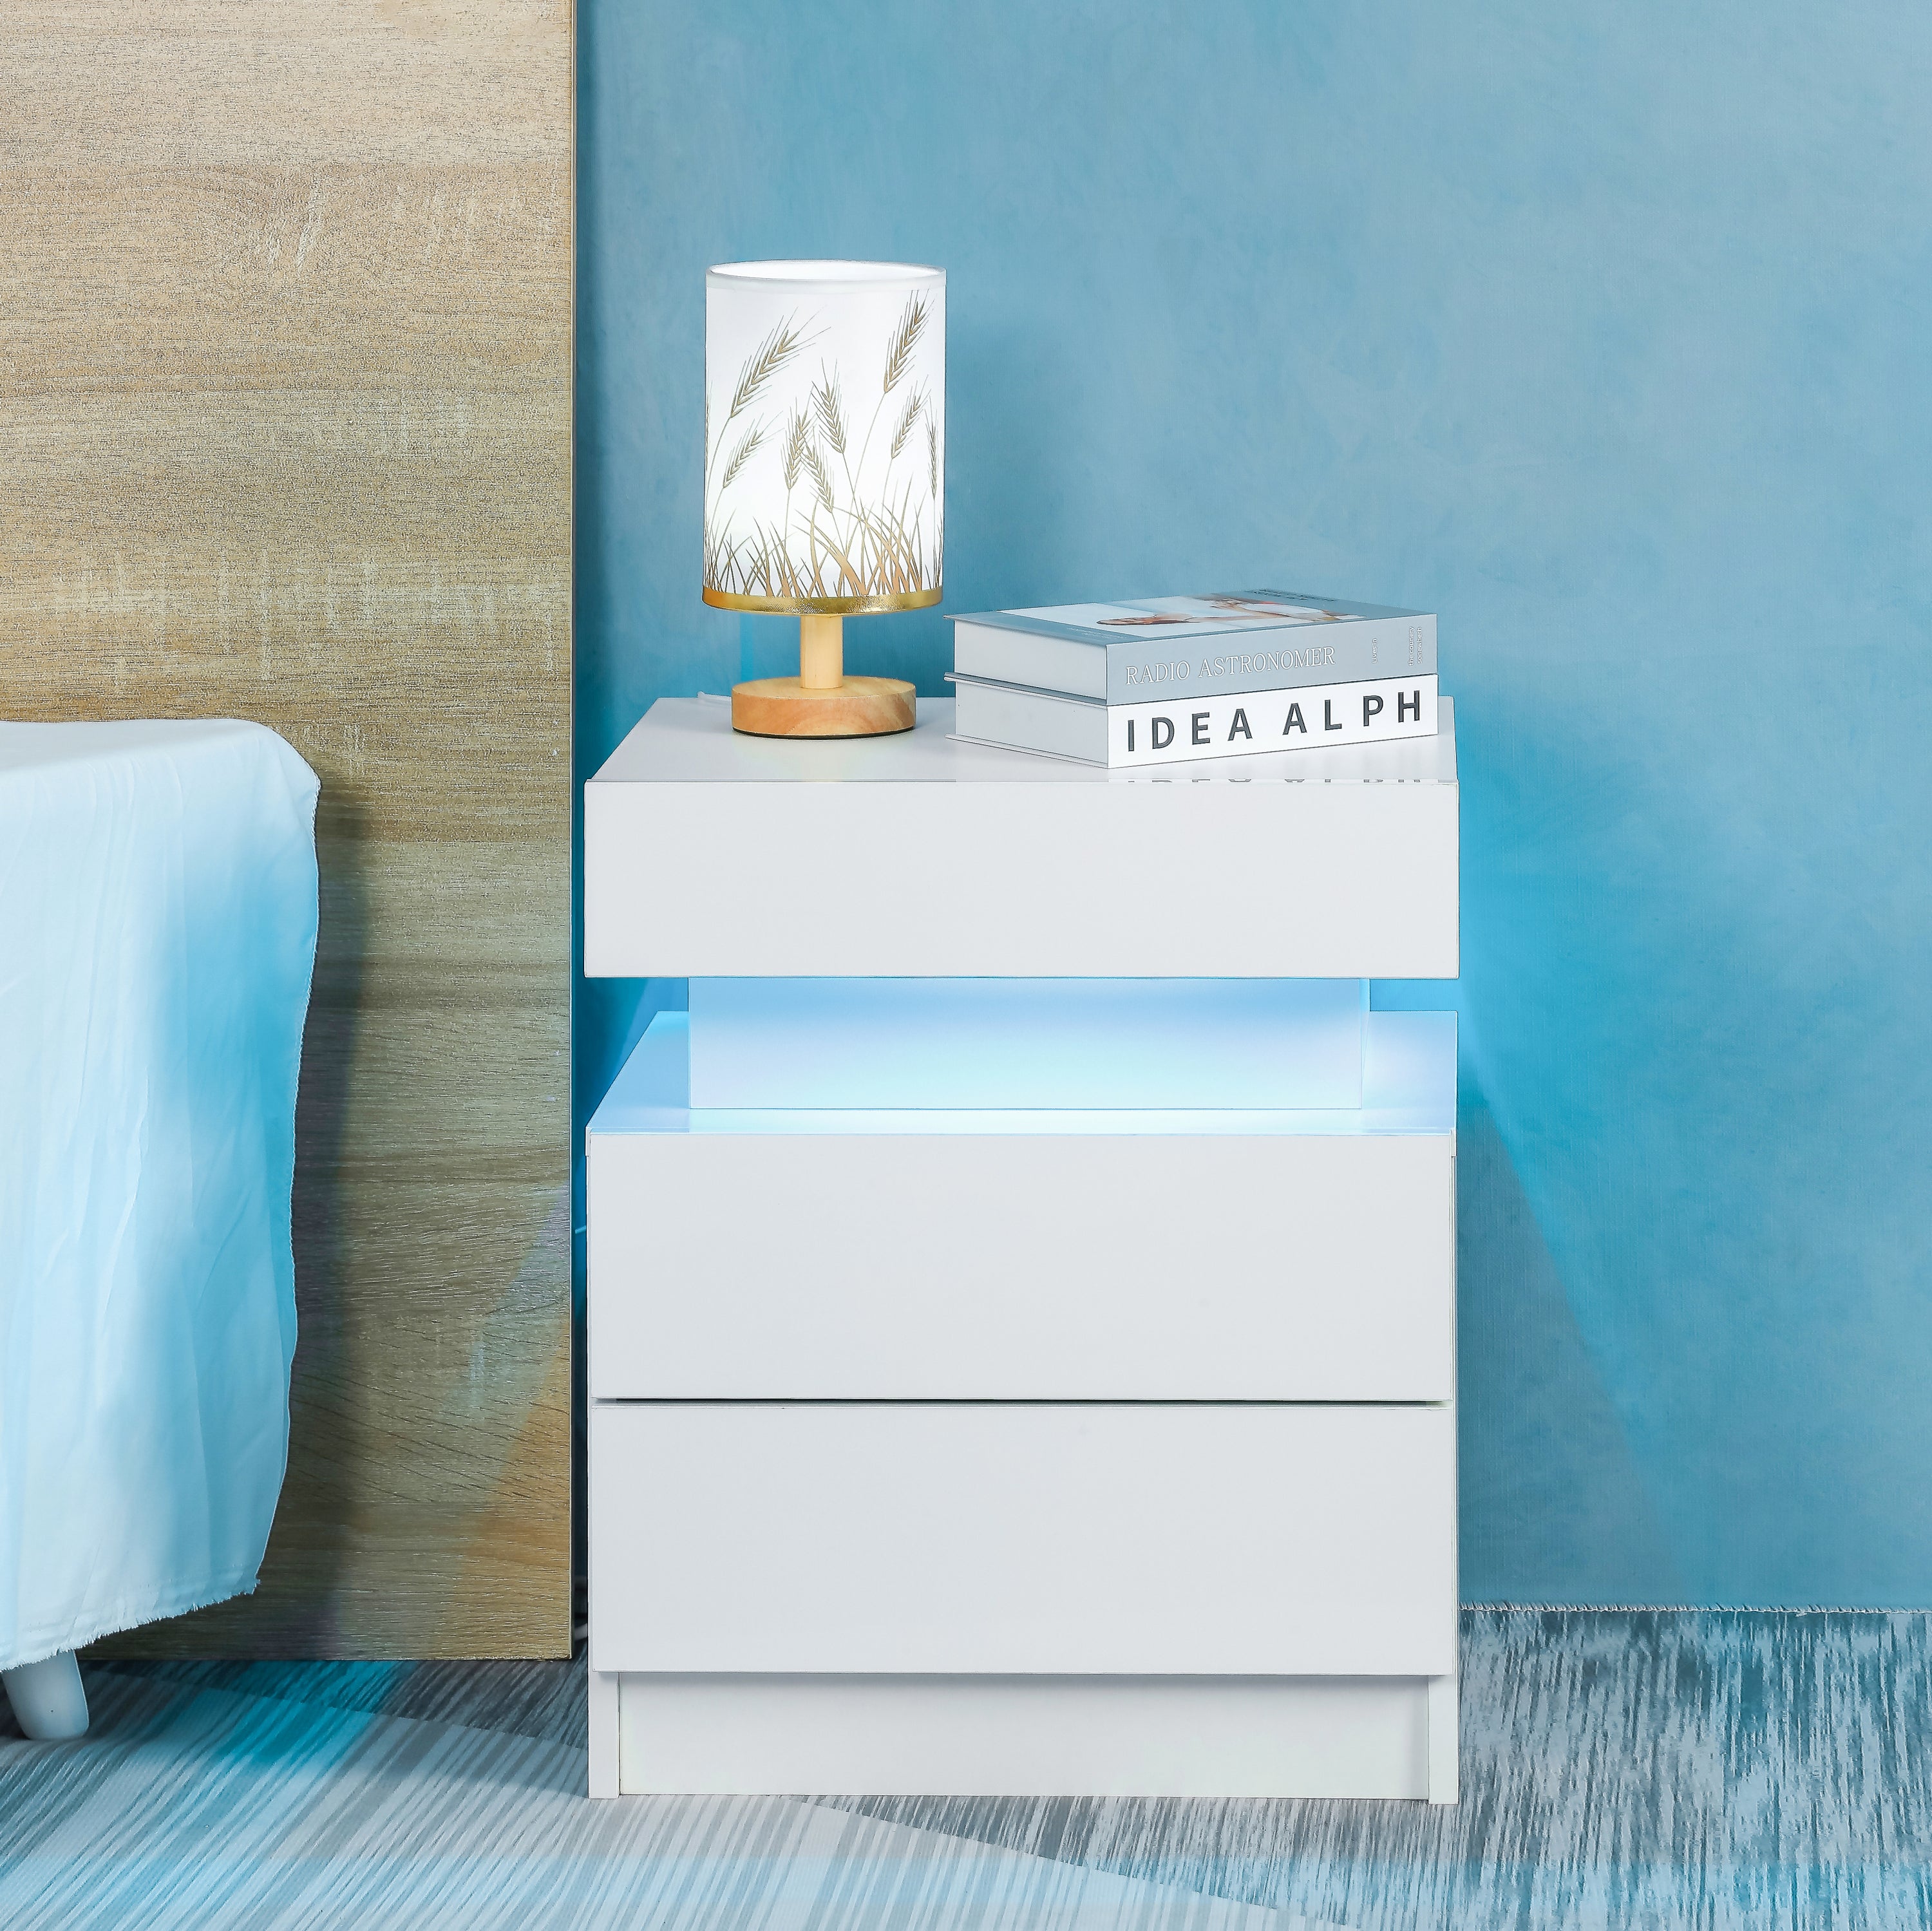 Modern Nightstand with LED Light and Lift Top Storage